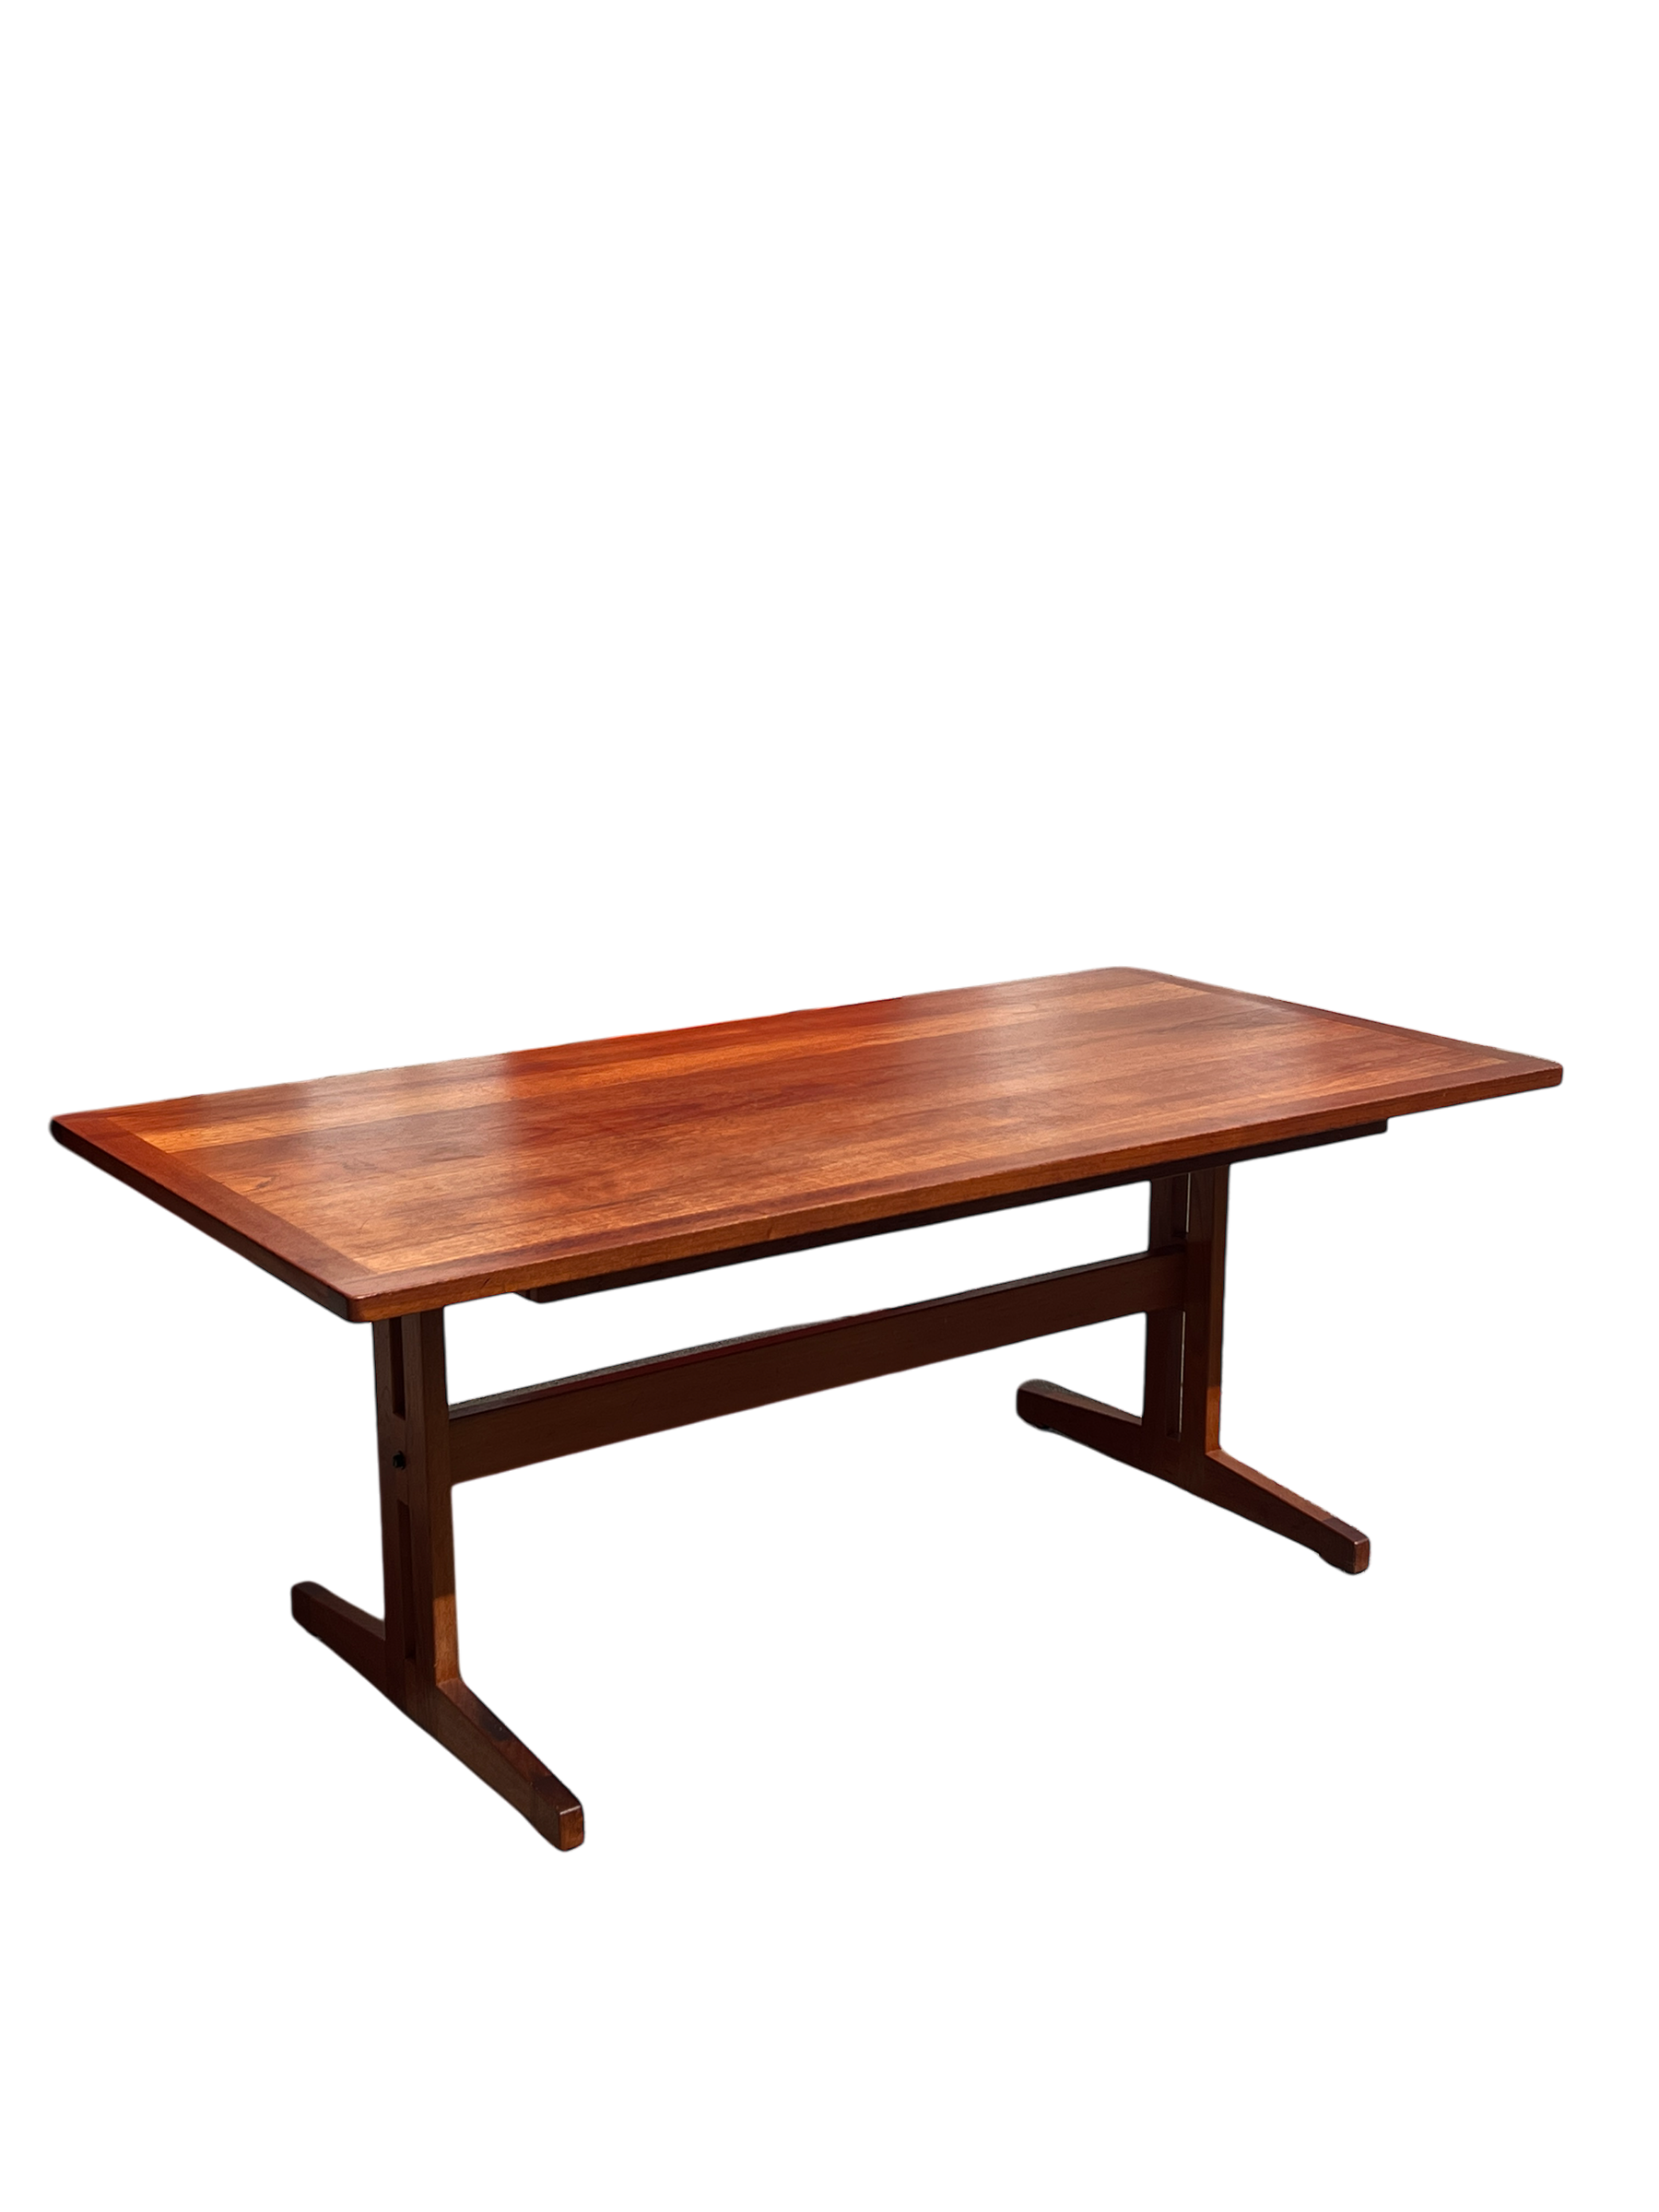 1960s Mid-Century Teak Dining Table for Ulferts, Made in Sweden